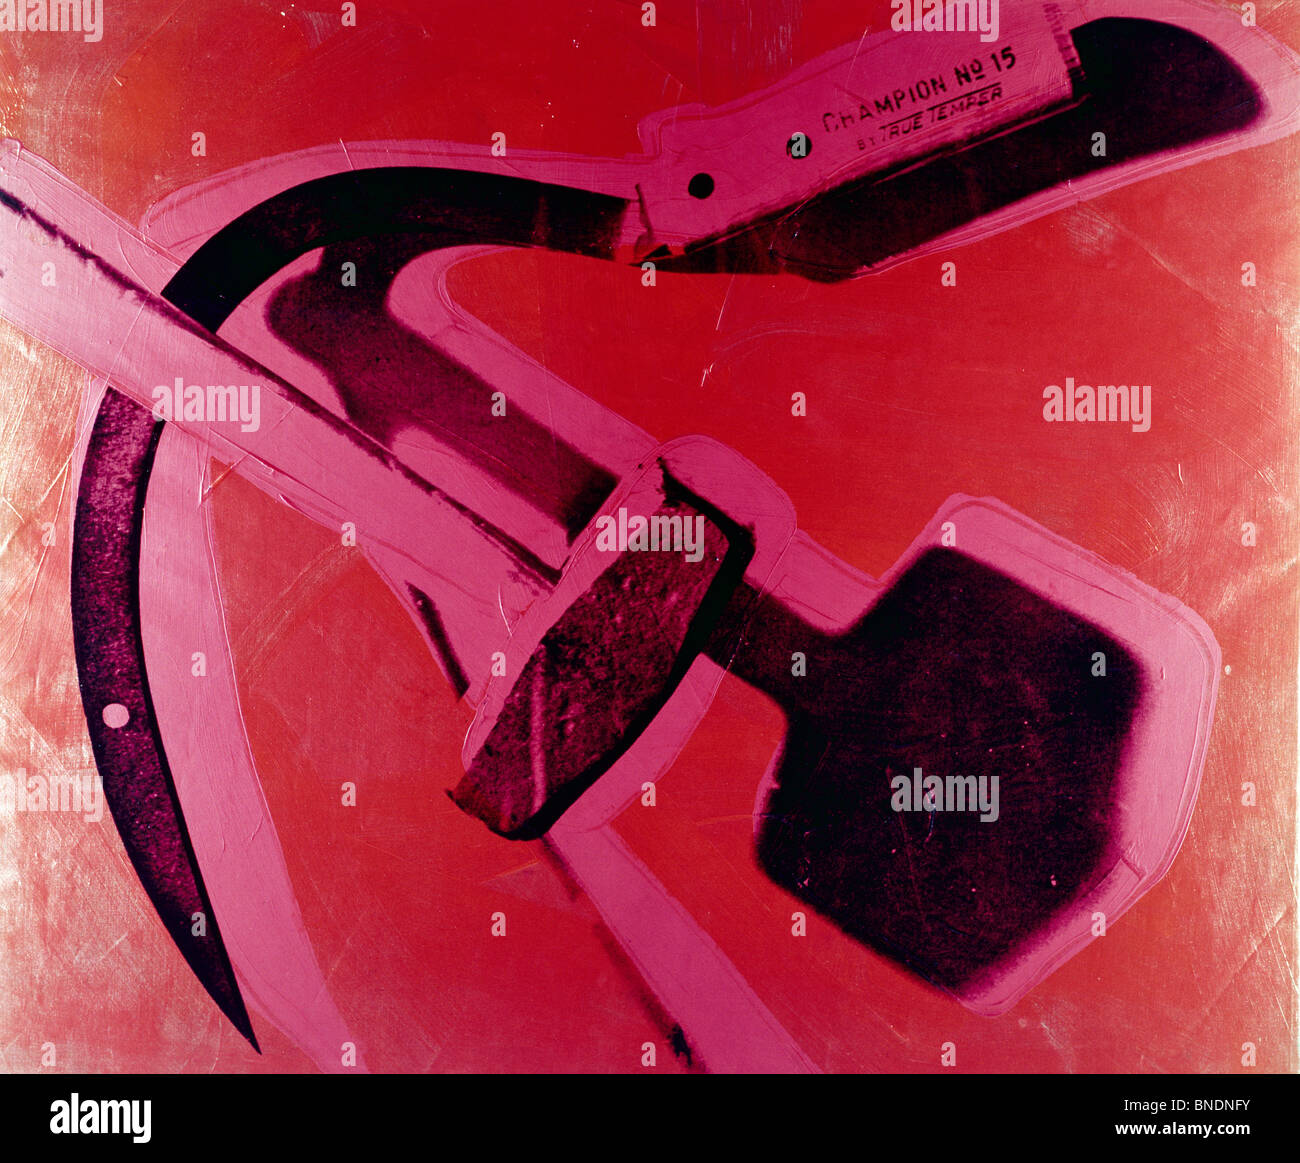 Hammer and Sickle by Andy Warhol, (1928-1987) Stock Photo